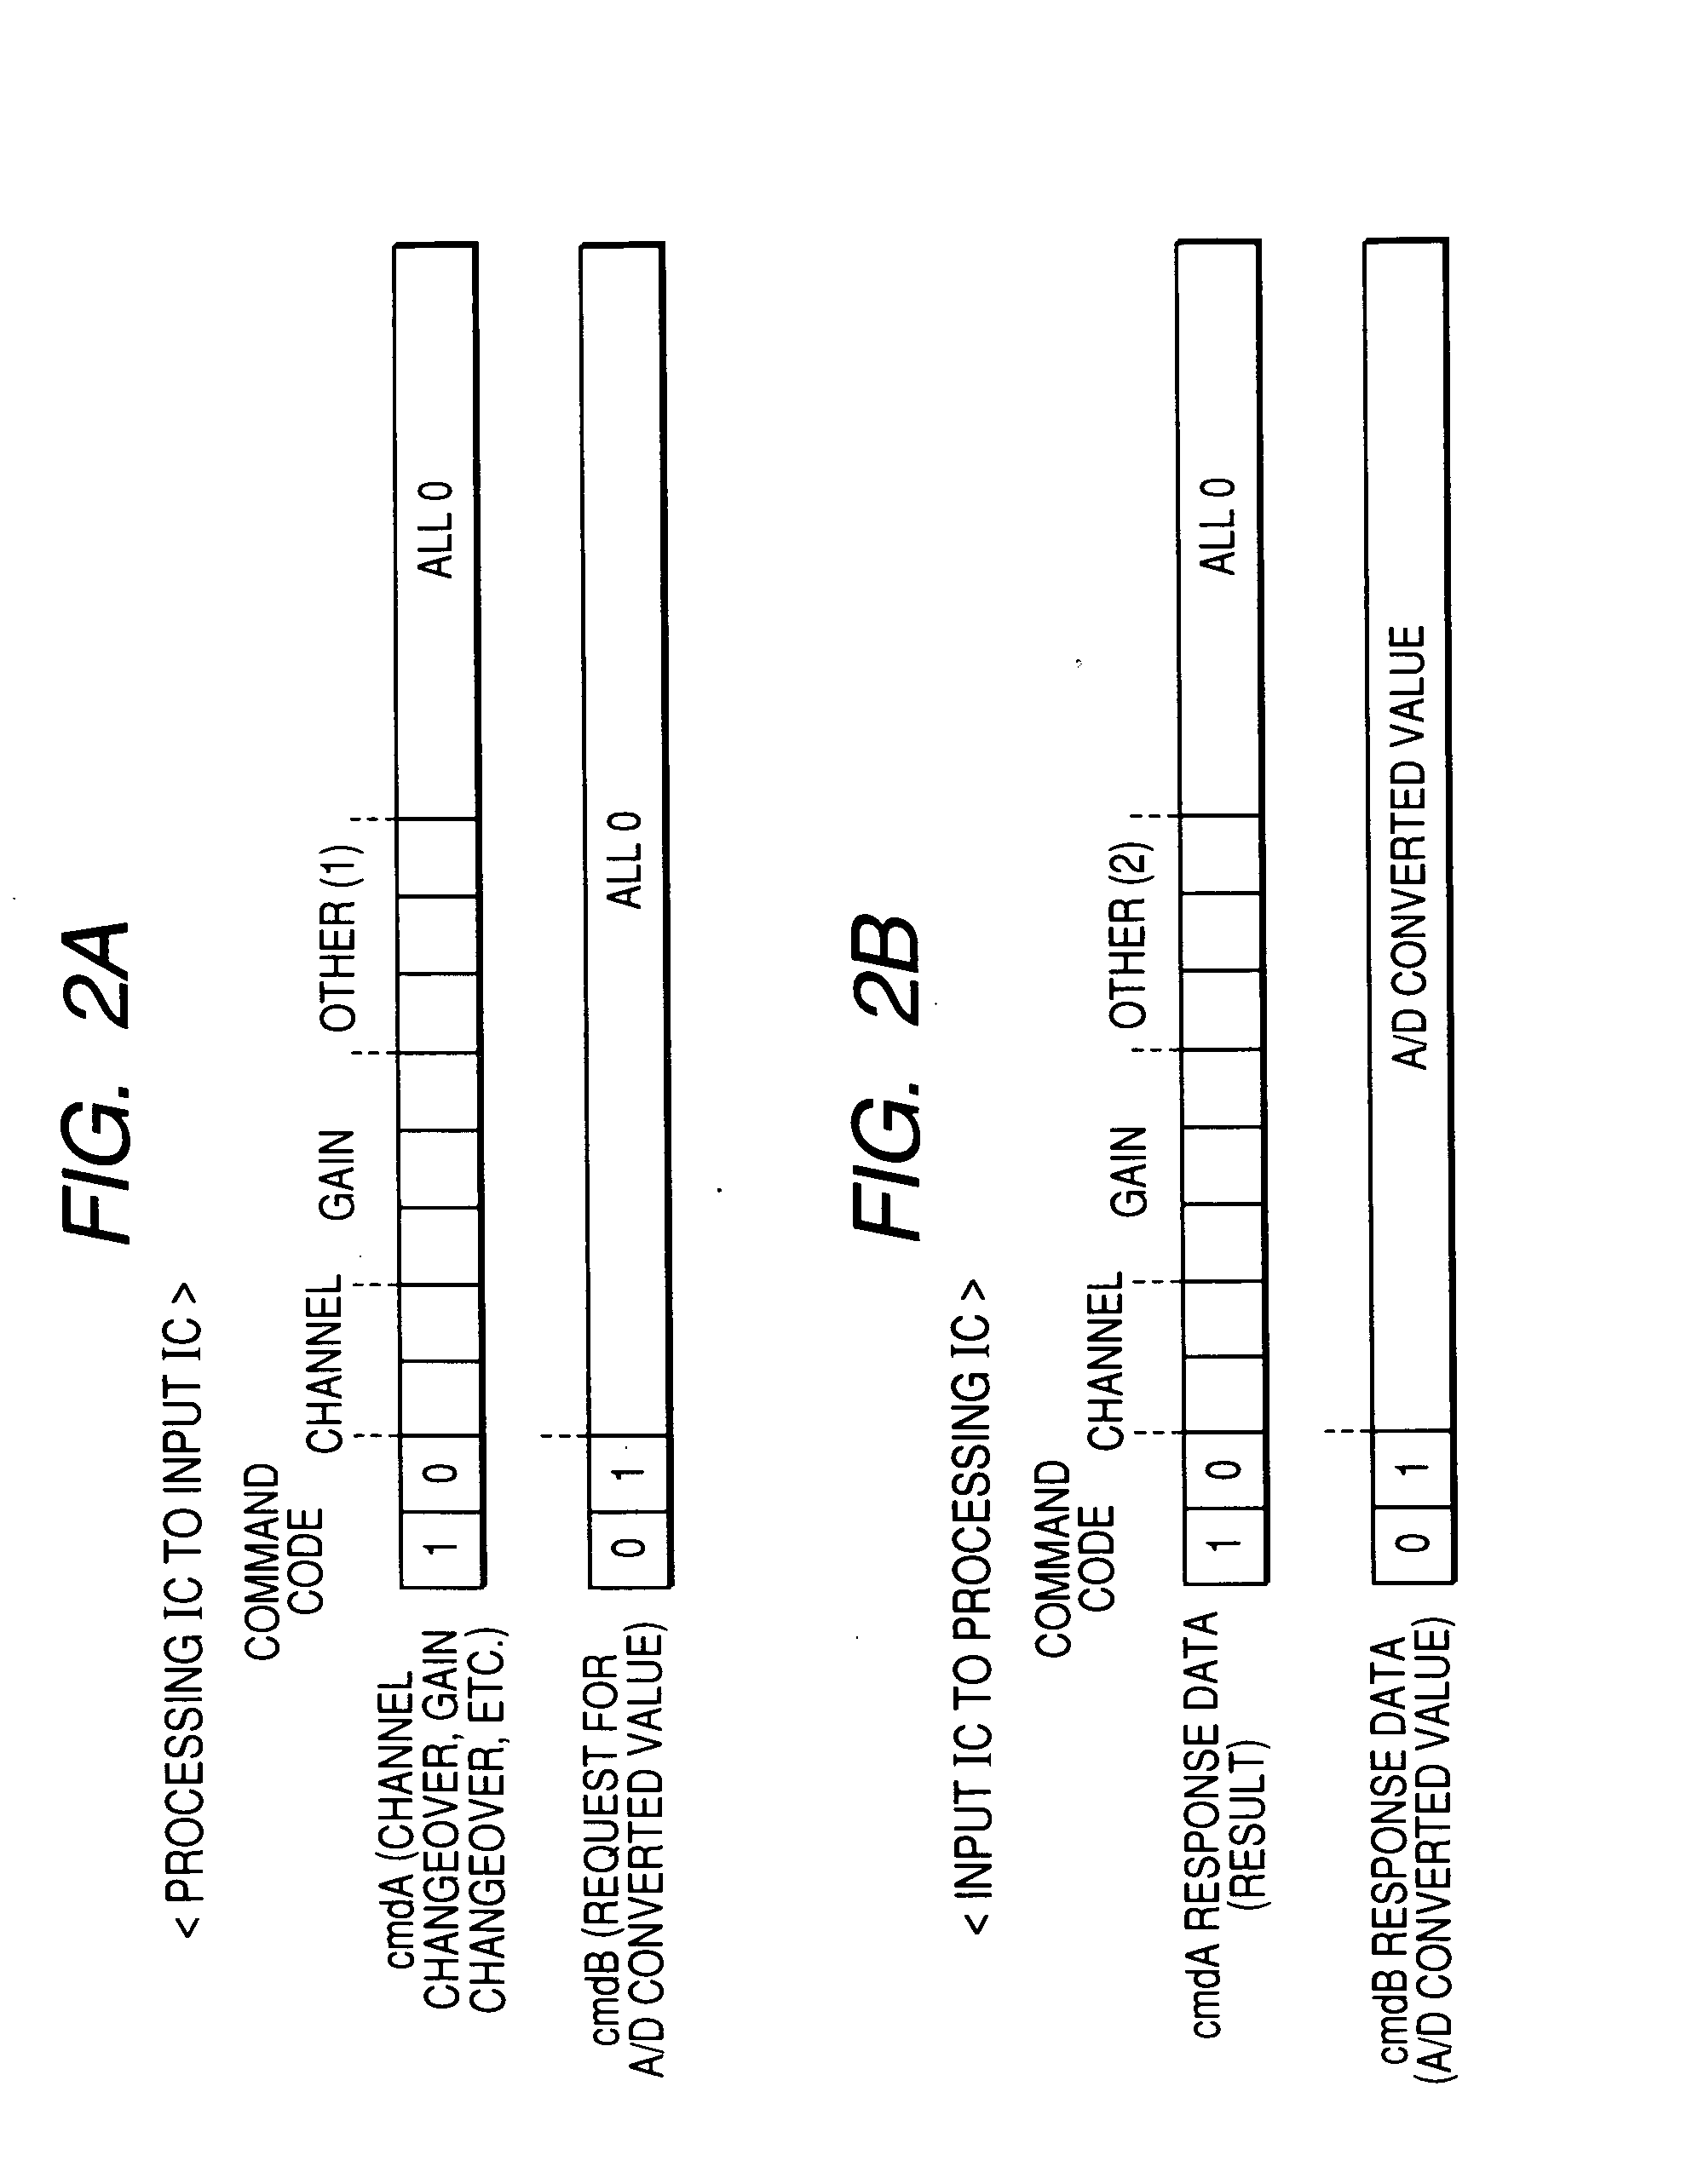 Apparatus for processing sensor signal from knock sensor of internal combustion engine